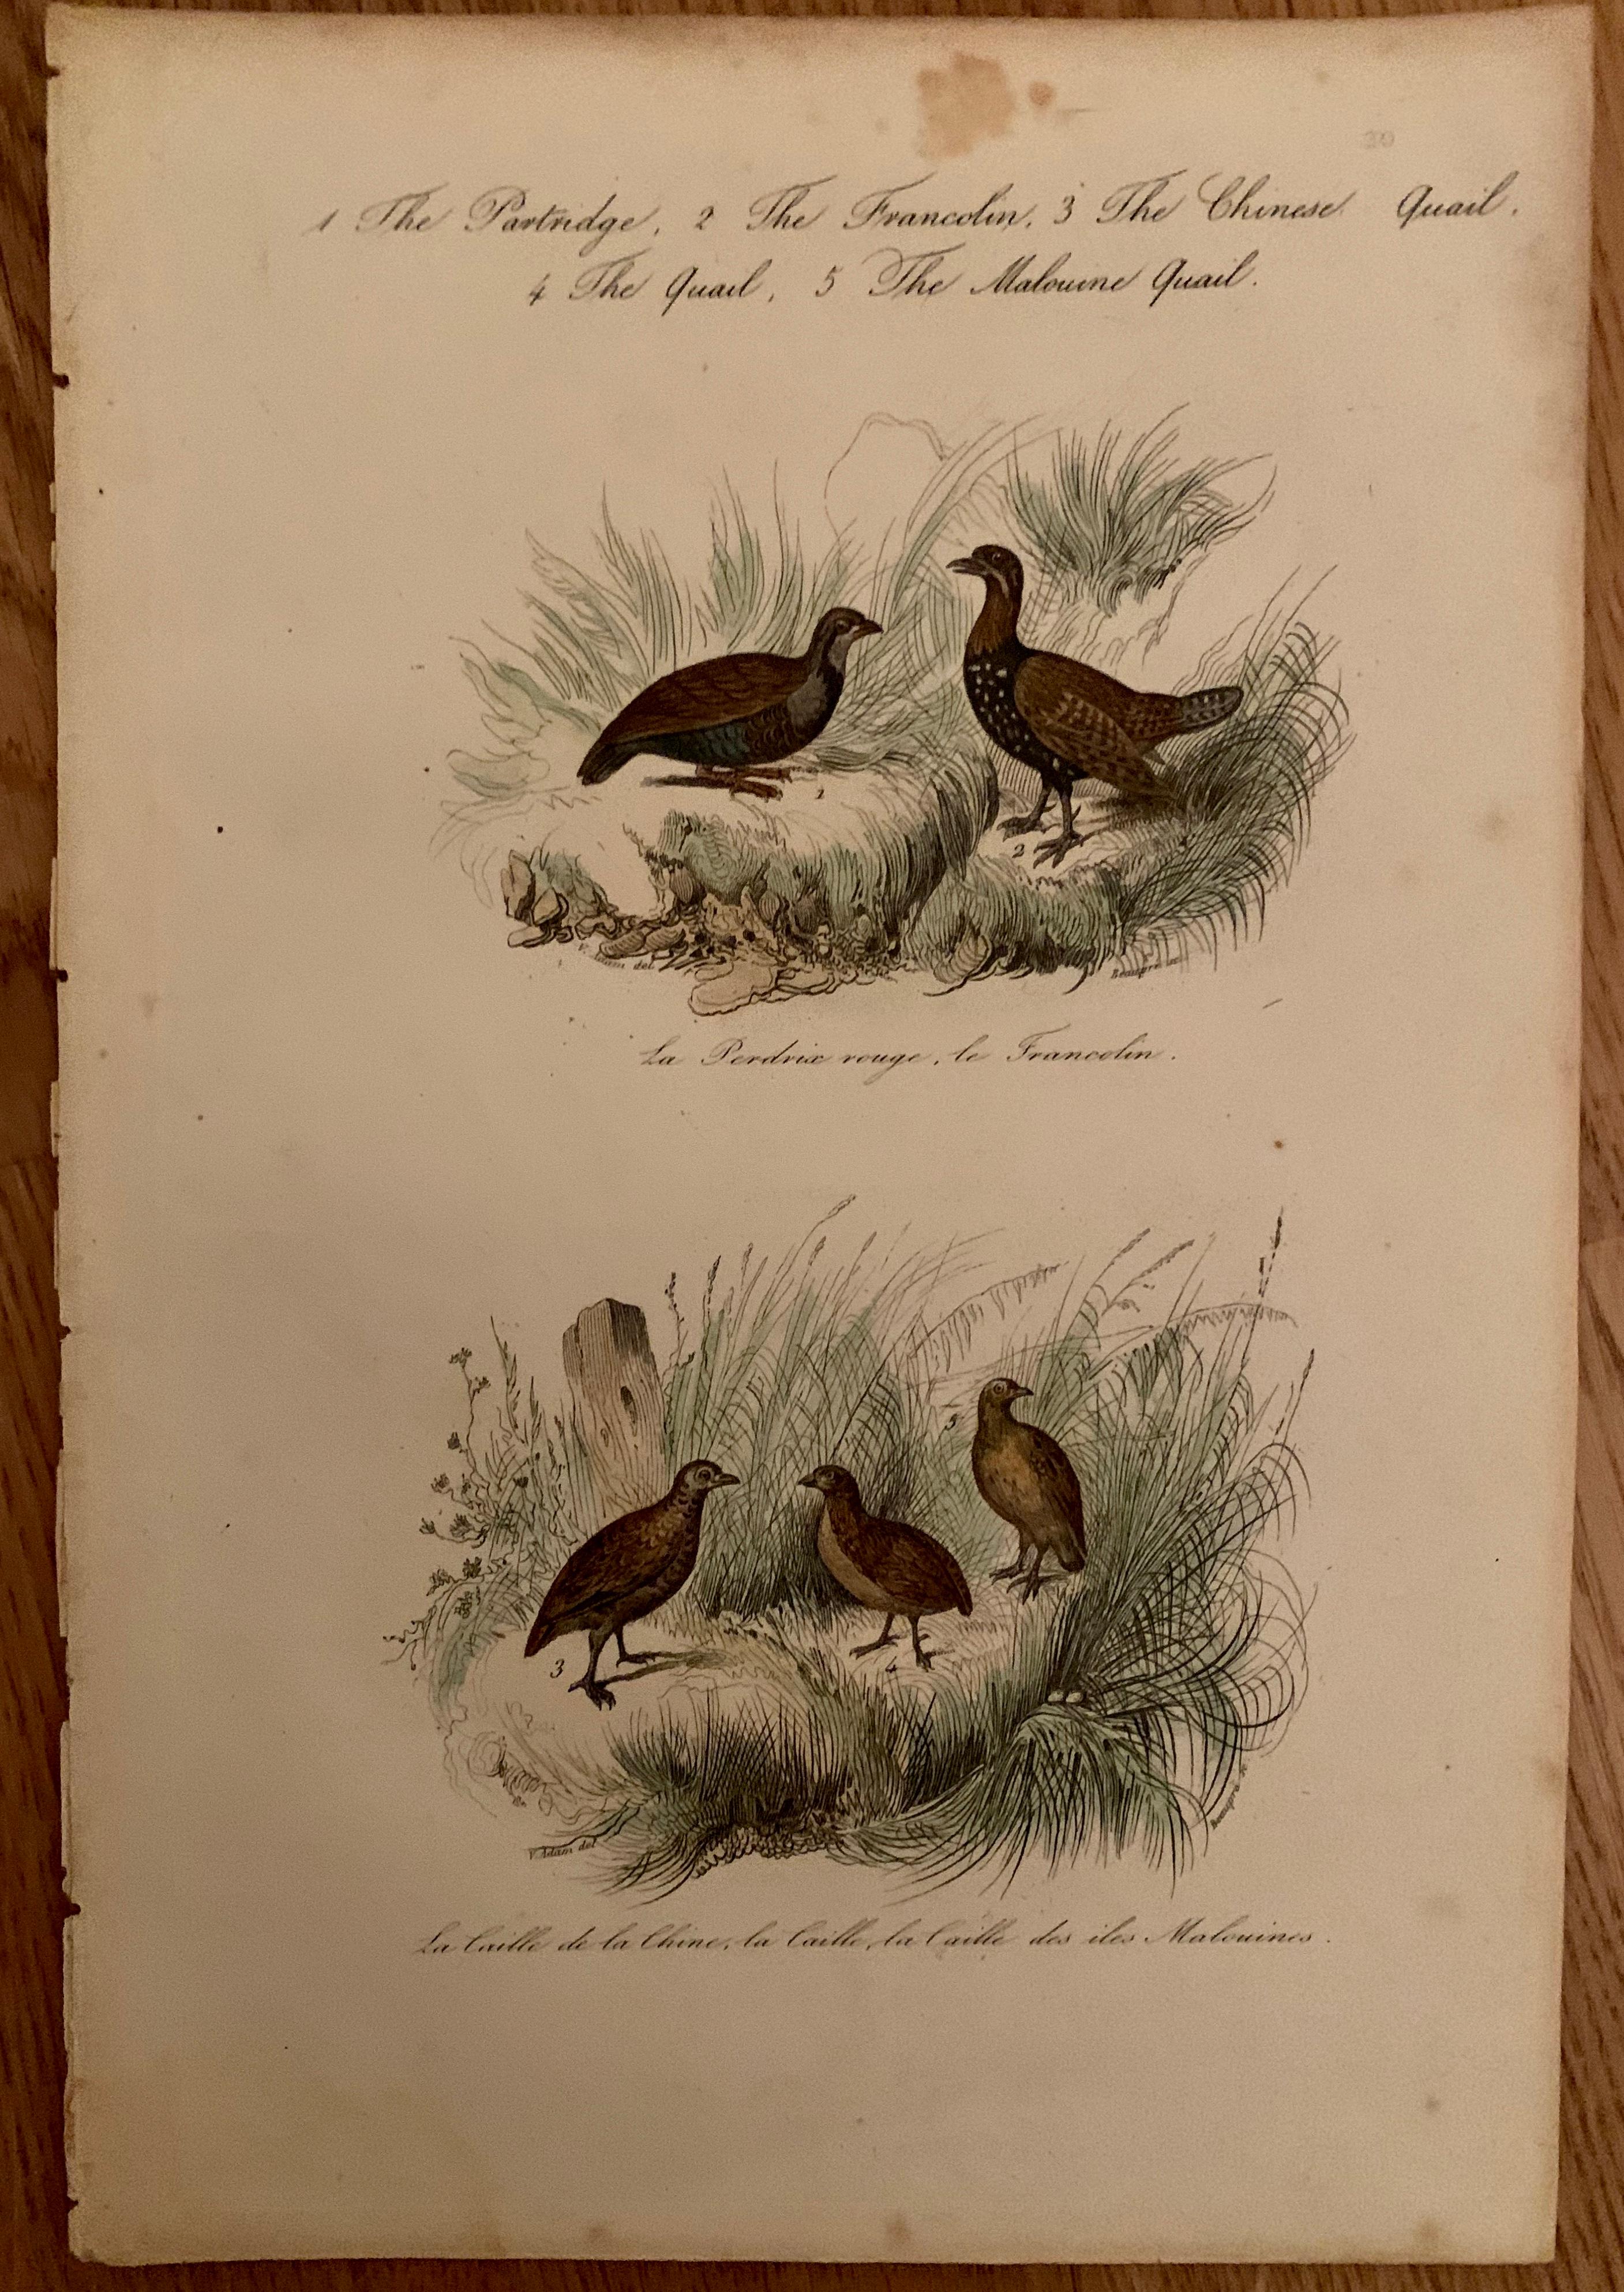 A set of 4 hand colored birds prints, from 1830. By Comte, Achille Joseph (1802-1866),
